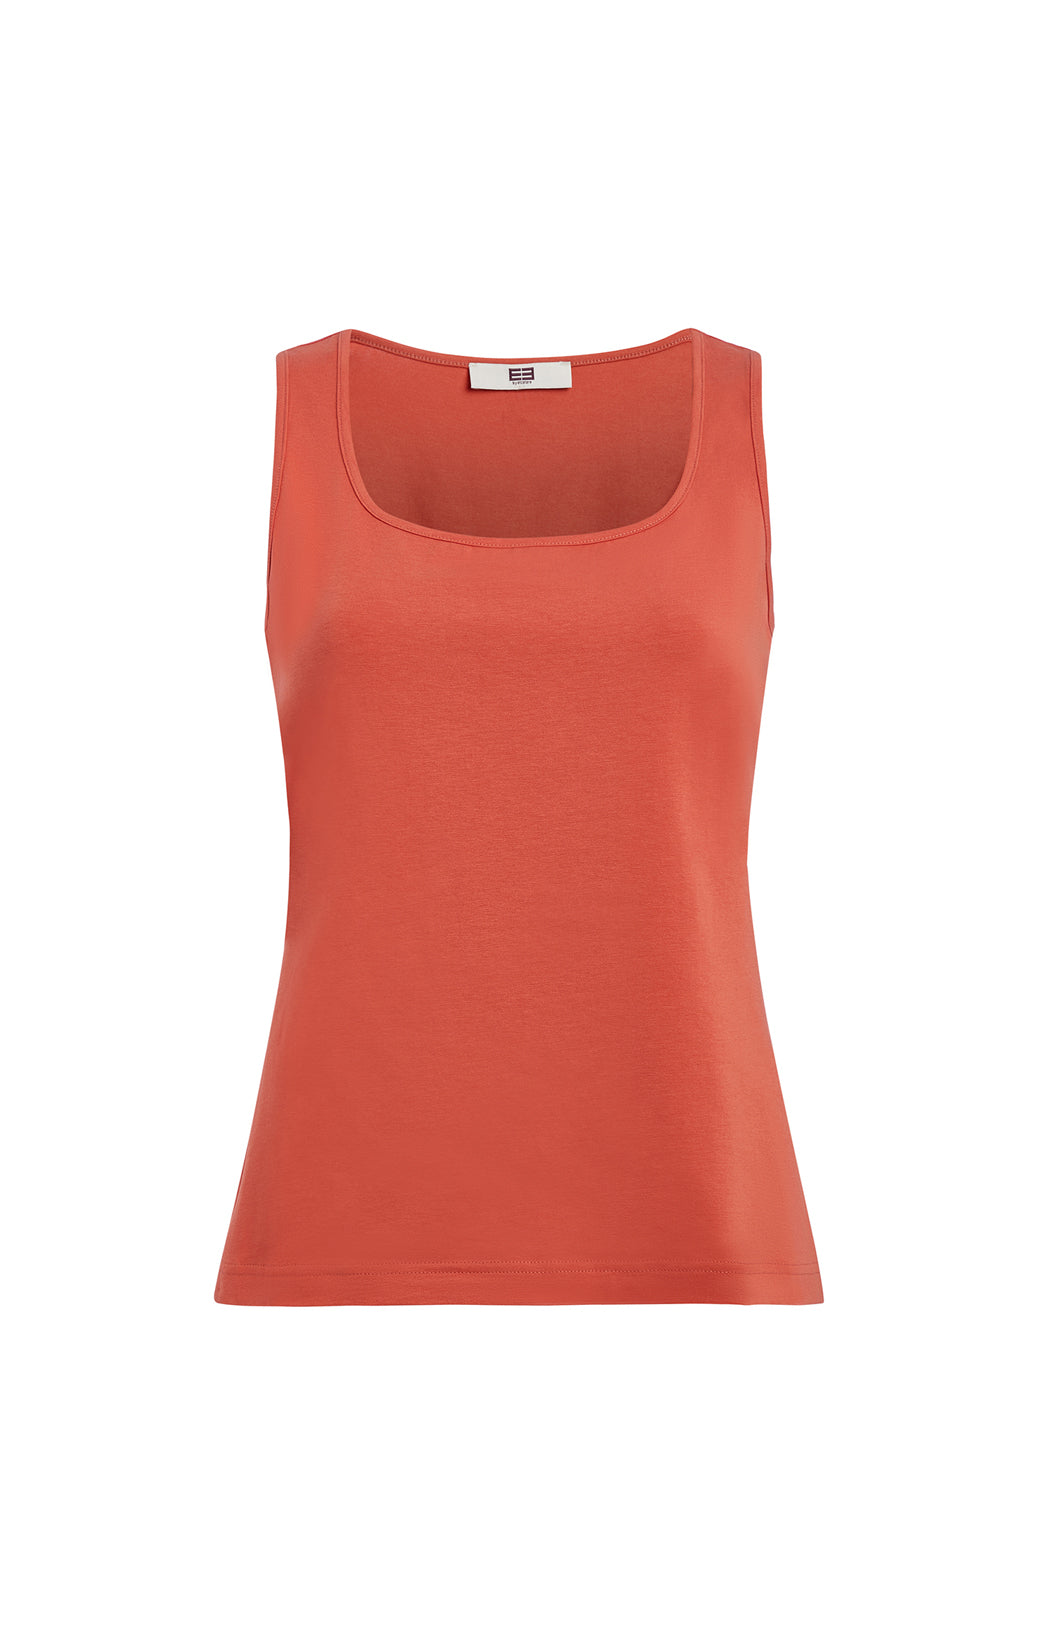 Laguna-Nvy - Stretch Jersey Tank Top With Portrait Neck - Product Image